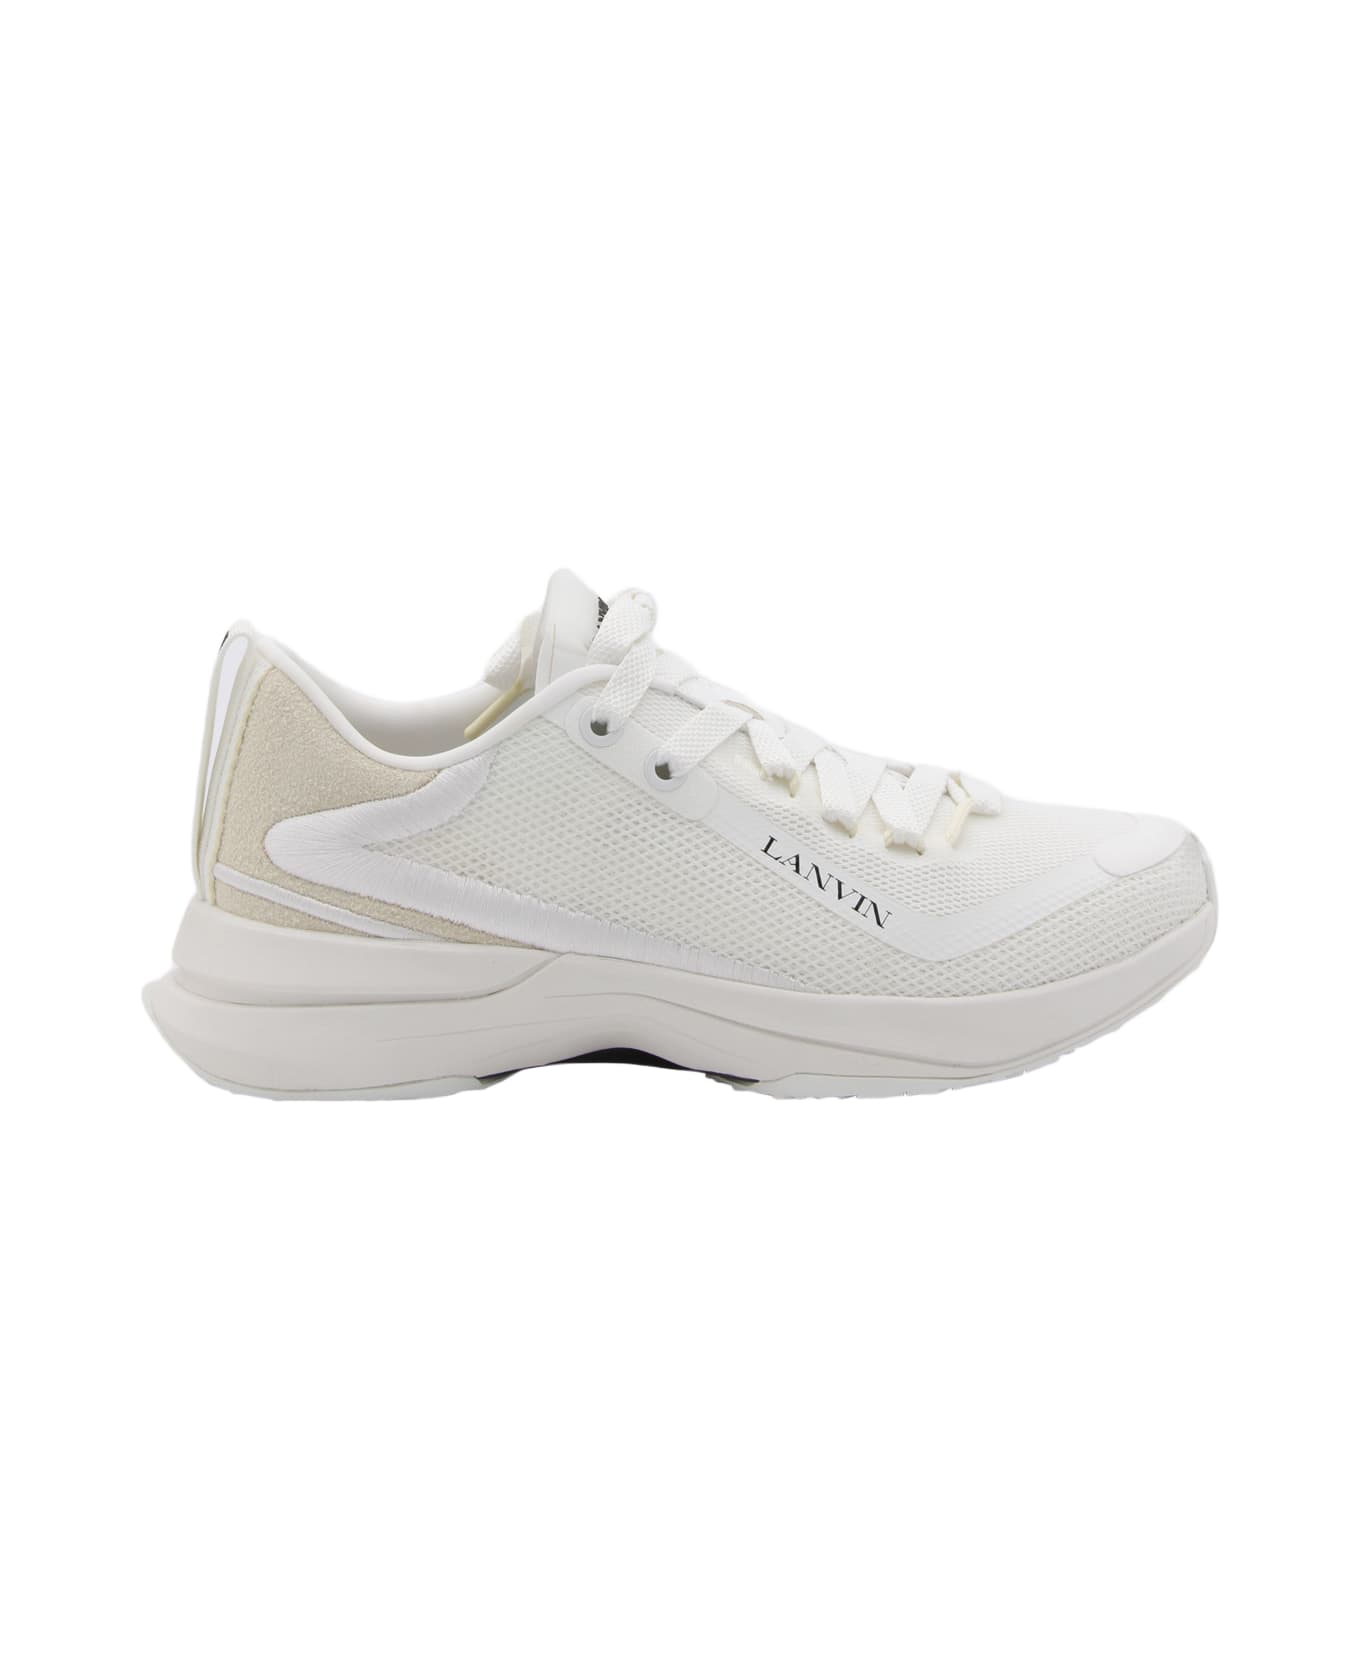 Lanvin White Leather Sneakers - White スニーカー